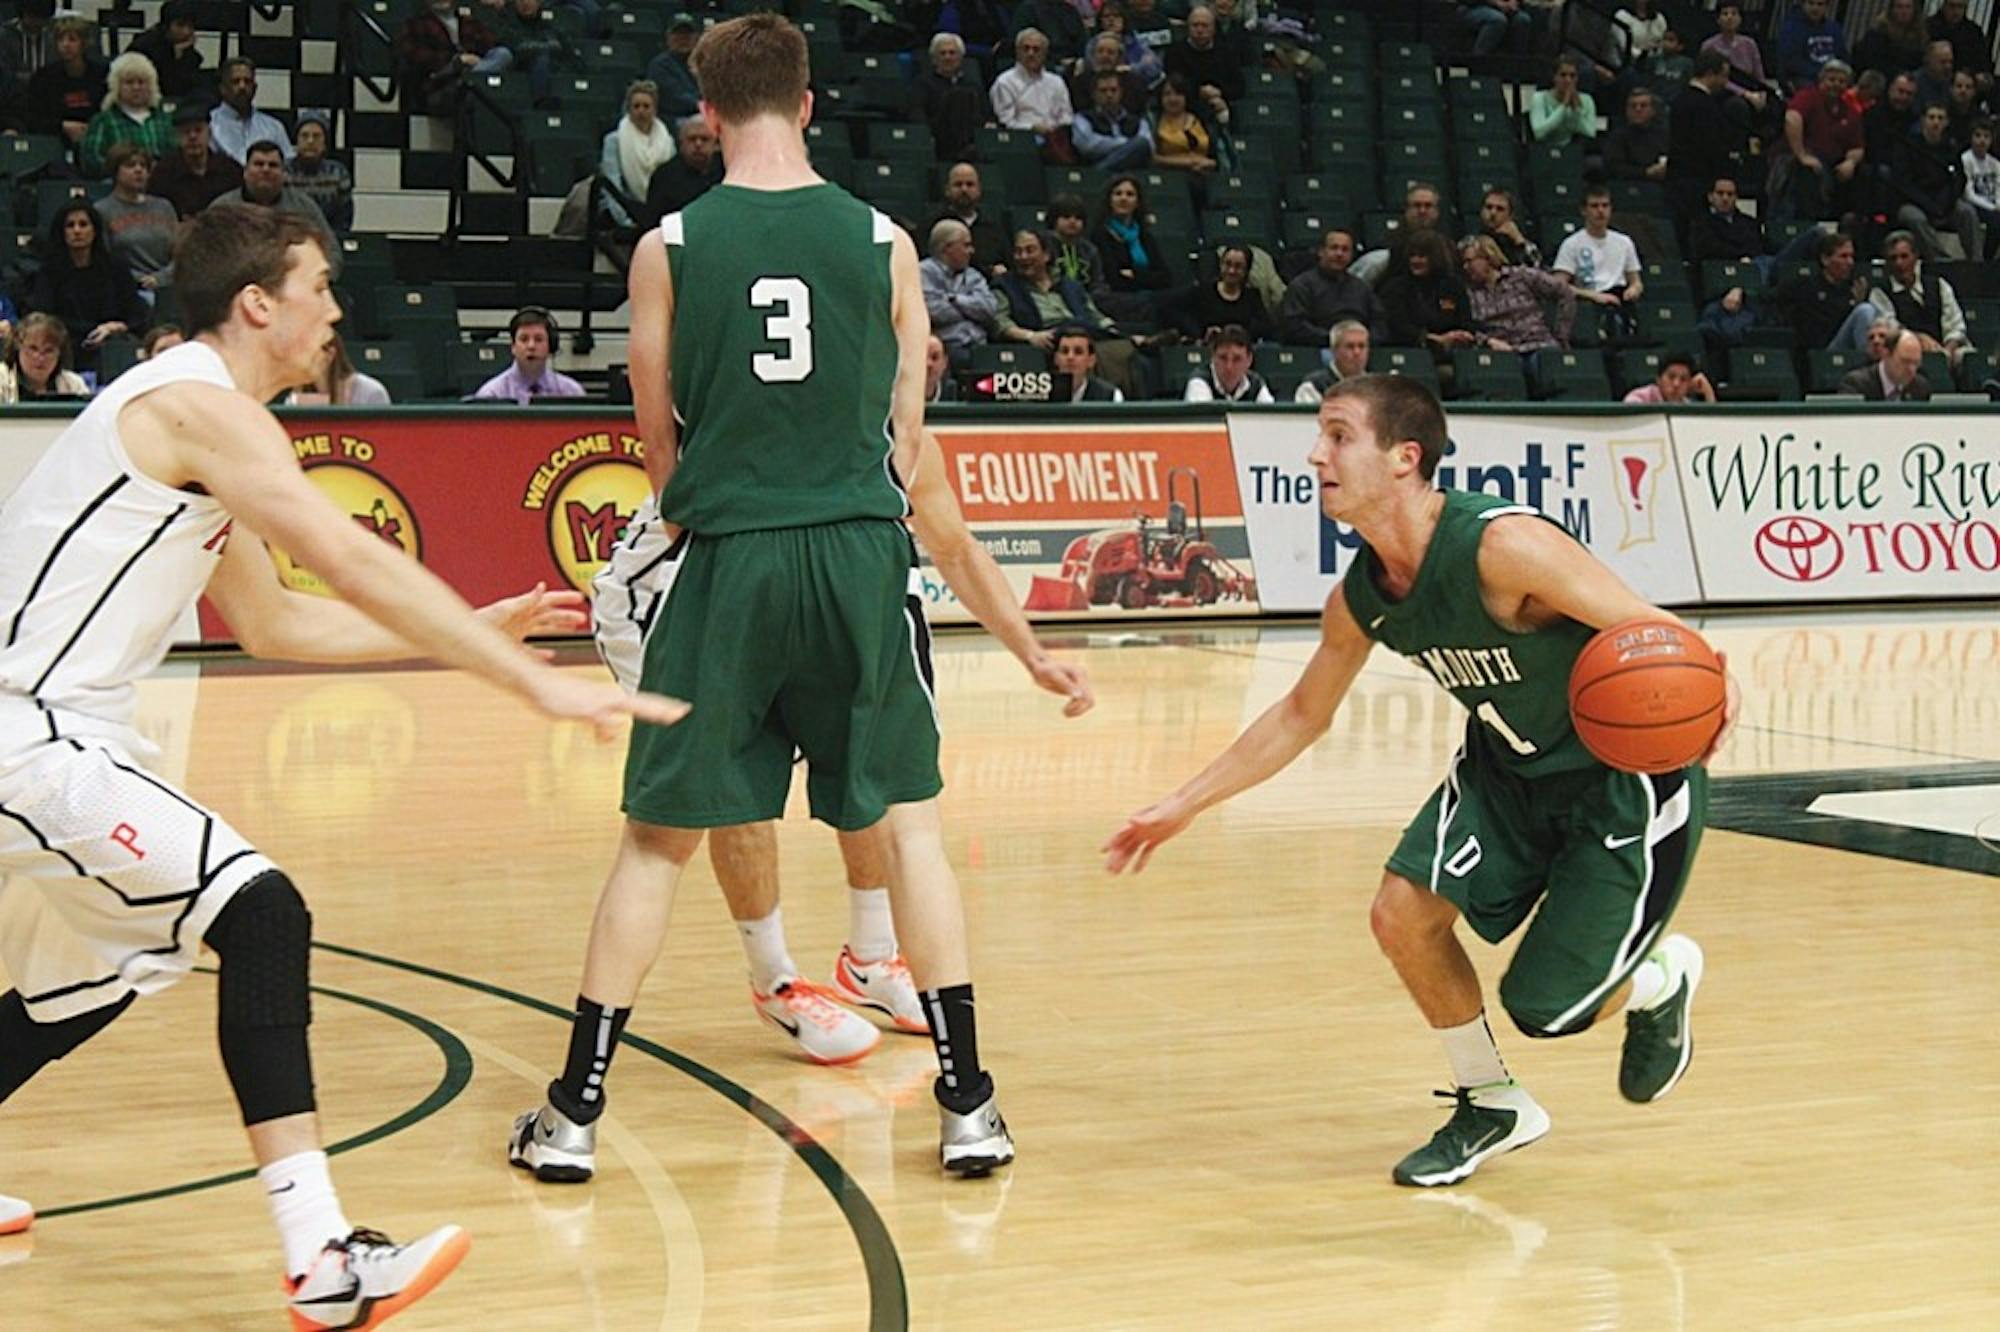 The men’s basketball team had a disappointing road weekend, losing twice.